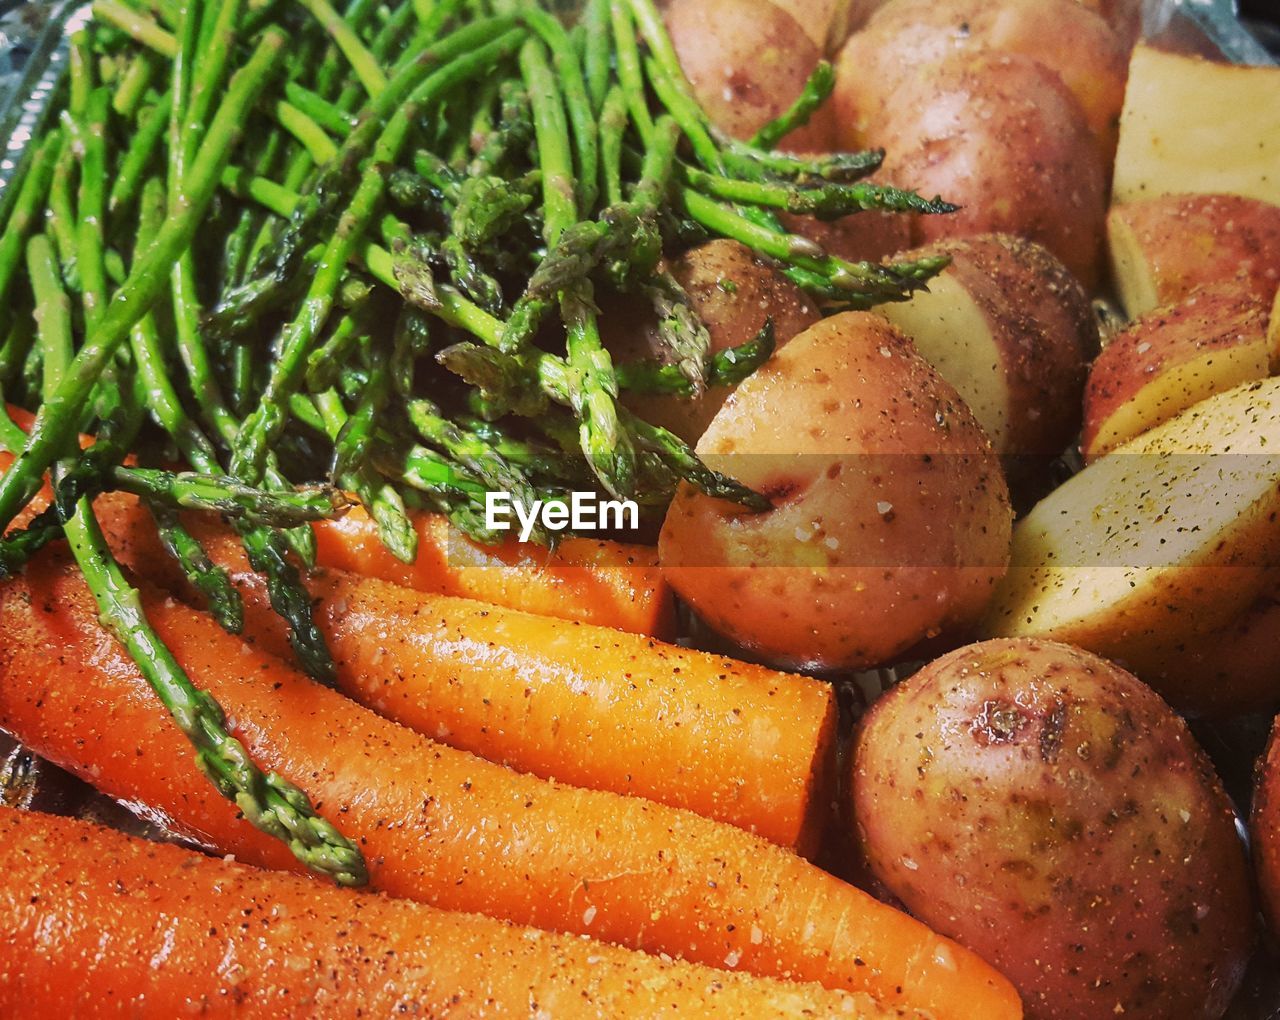 CLOSE-UP OF VEGETABLES